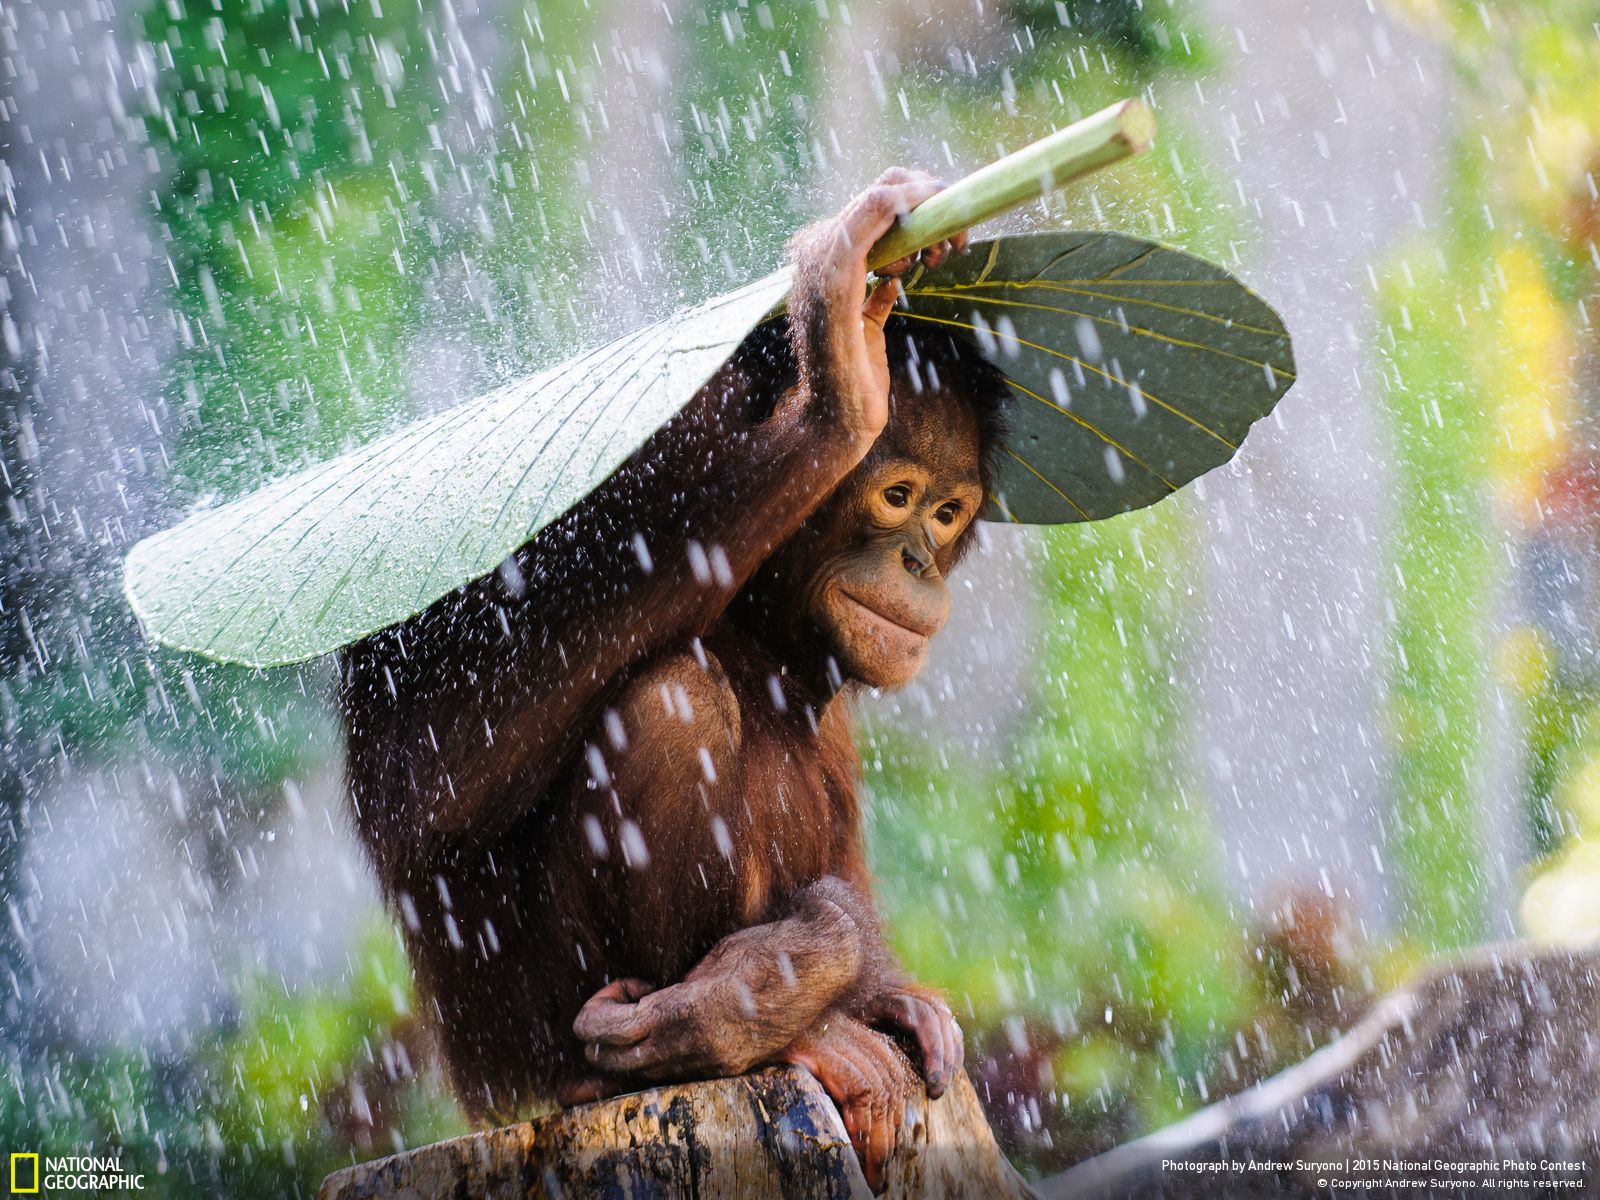 Aussie Photographer Wins National Geographic’s 2015 Photo Contest